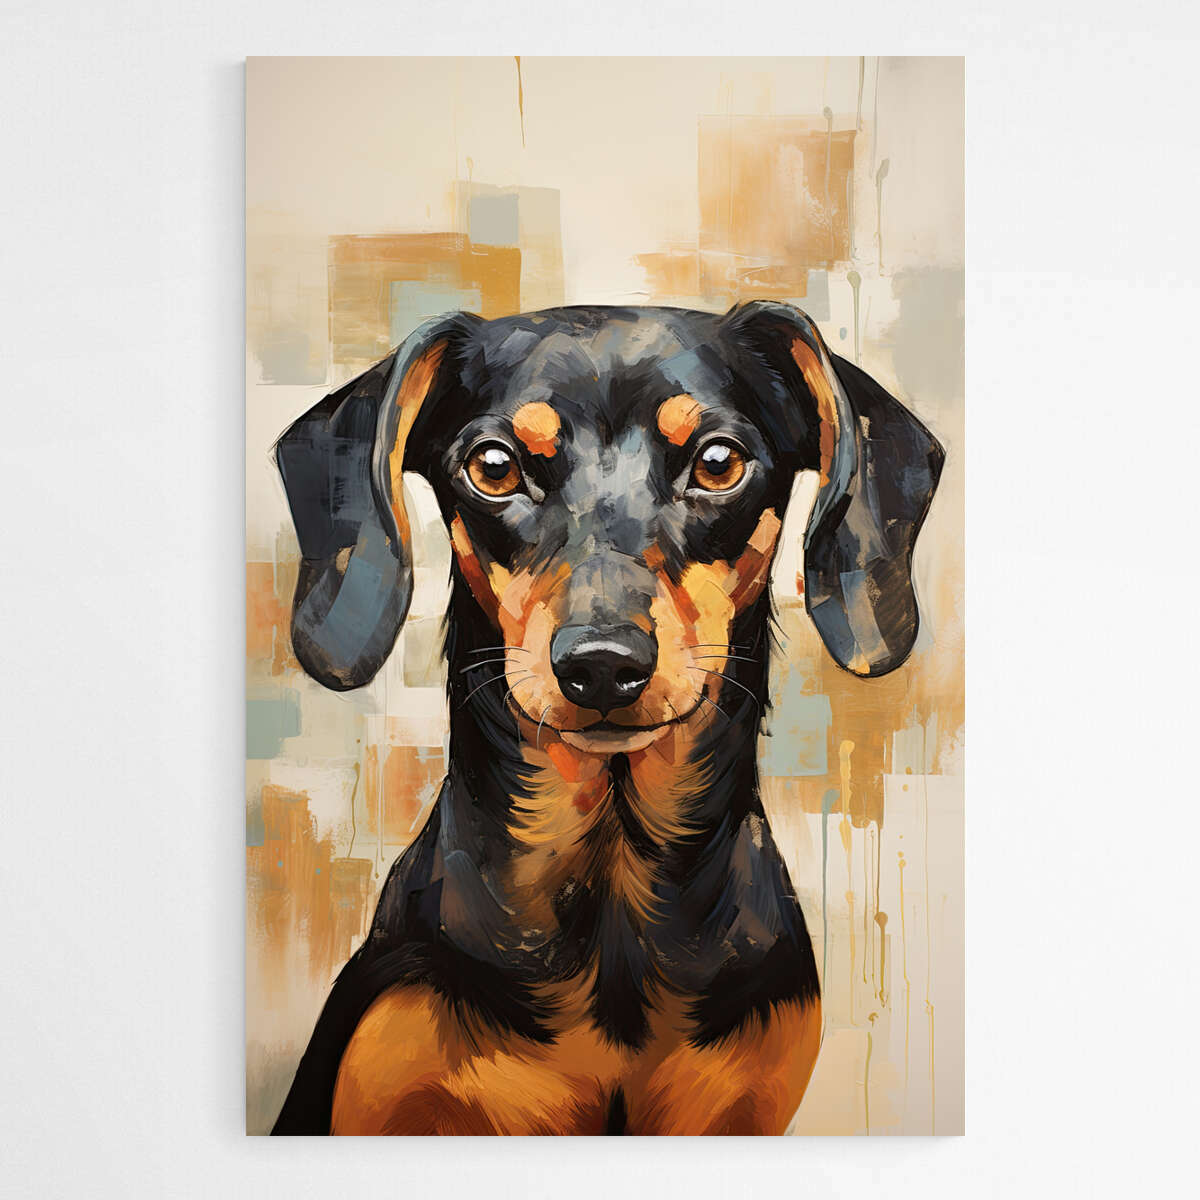 Abstract Dachshund Dog | Animals Wall Art Prints - The Canvas Hive